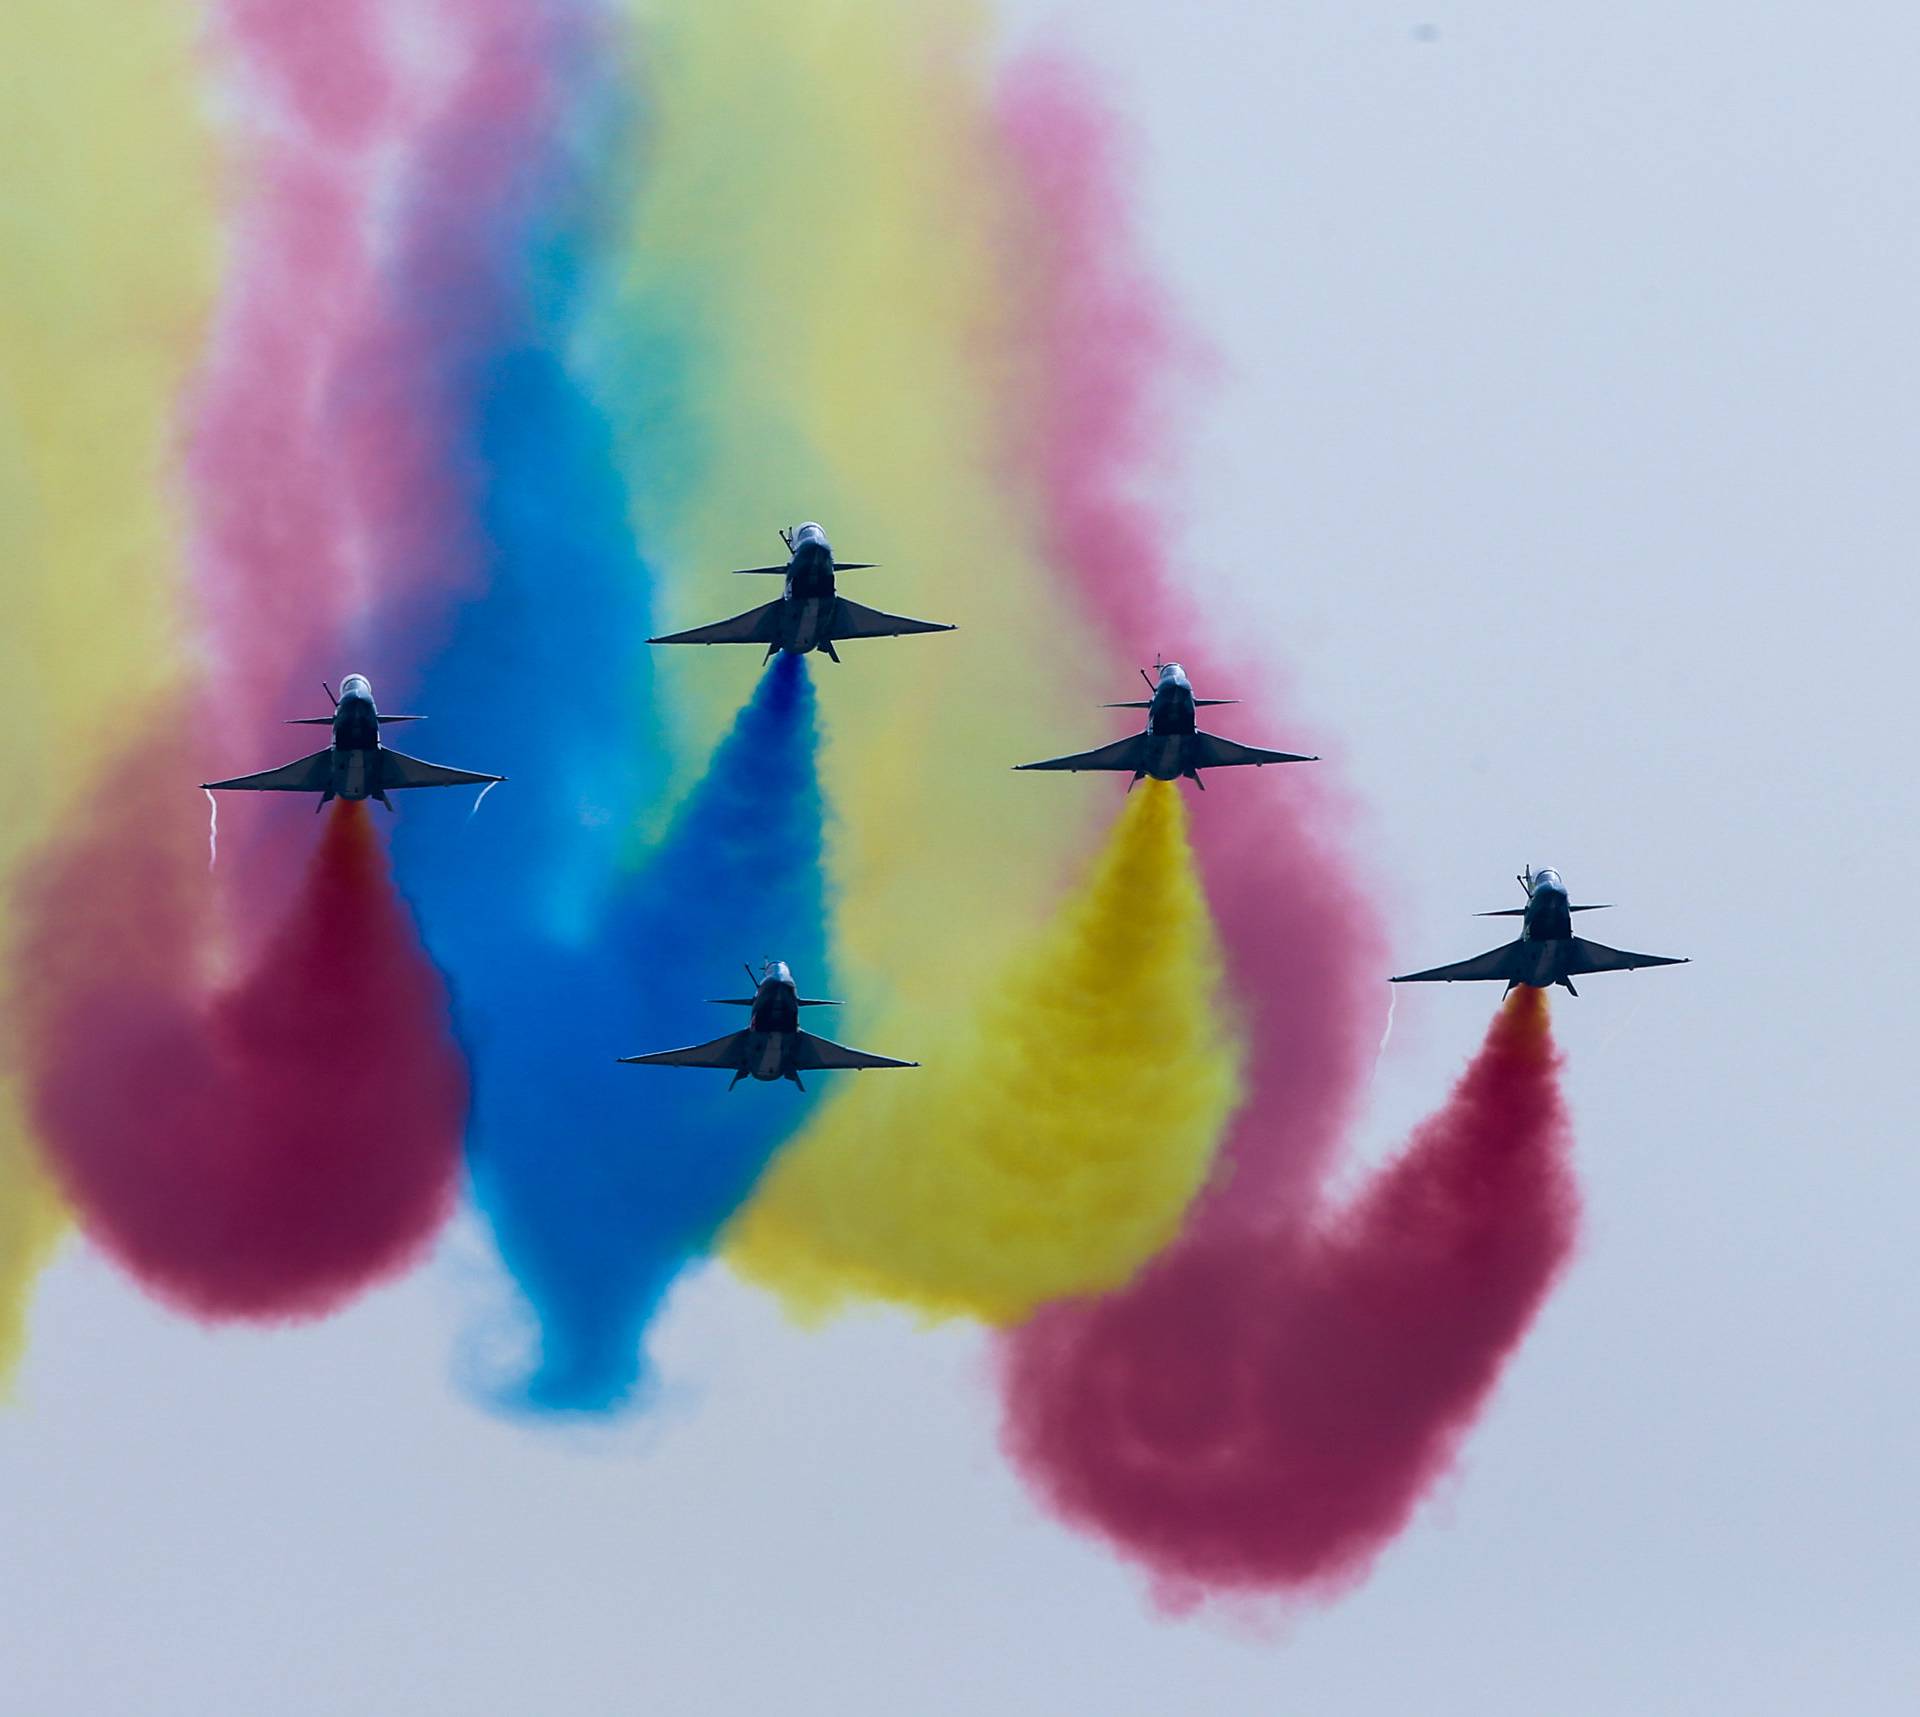 China's J-10 fighter jets perform during an air show, the 11th China International Aviation and Aerospace Exhibition in Zhuhai